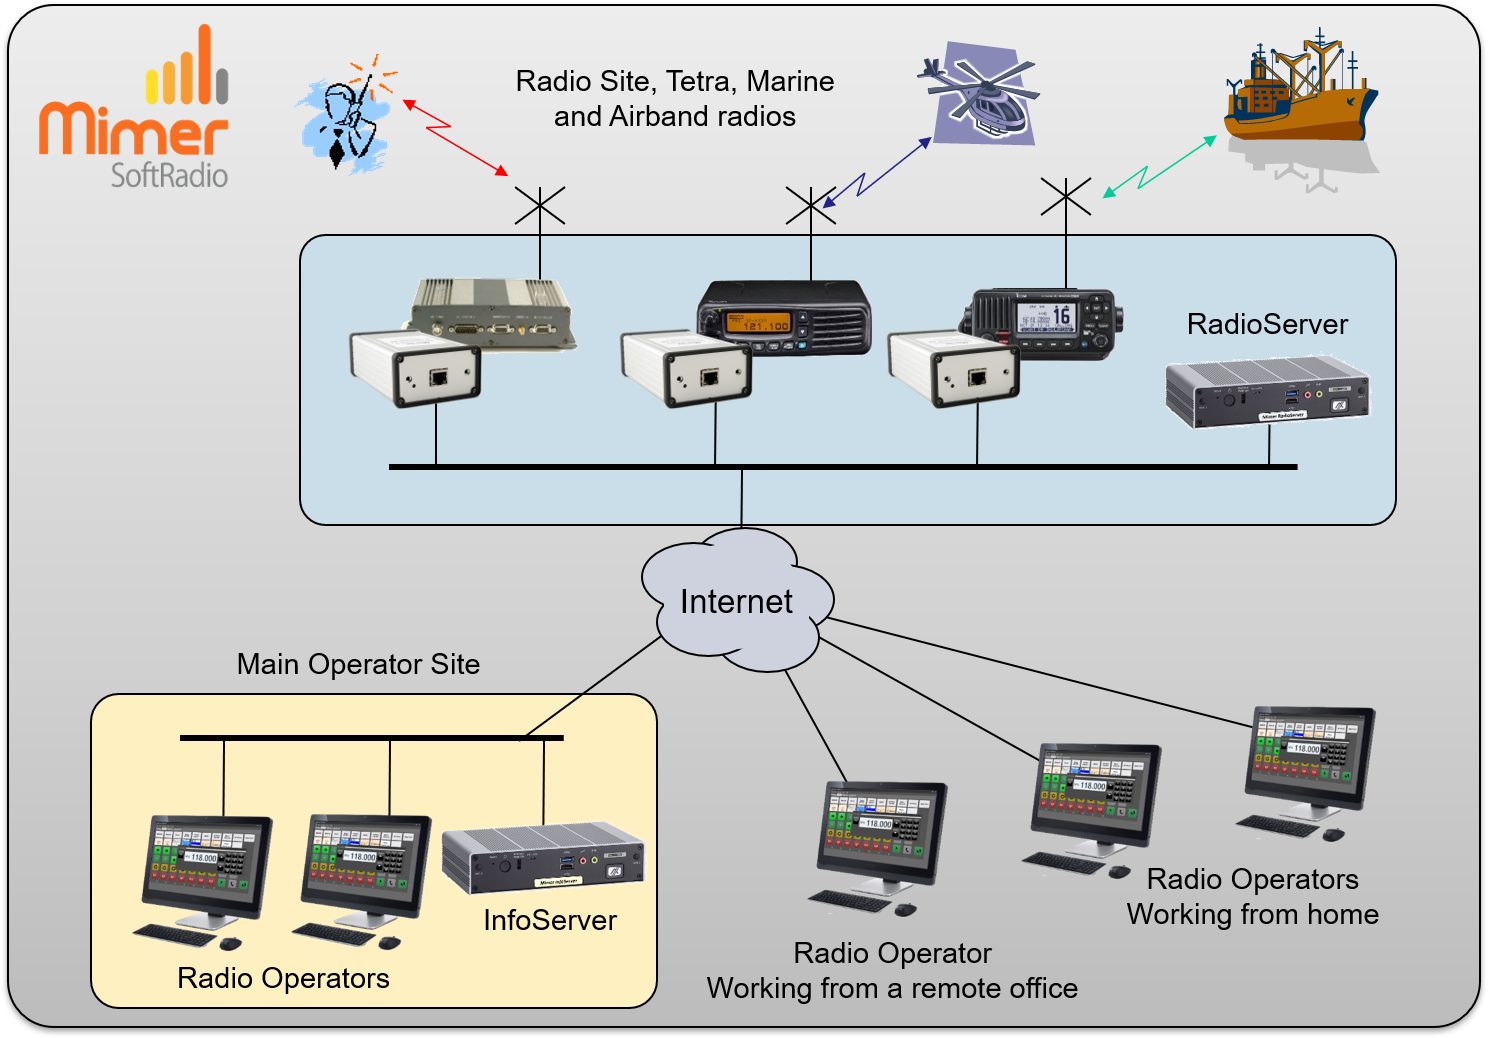 Offshore system with InfoServer